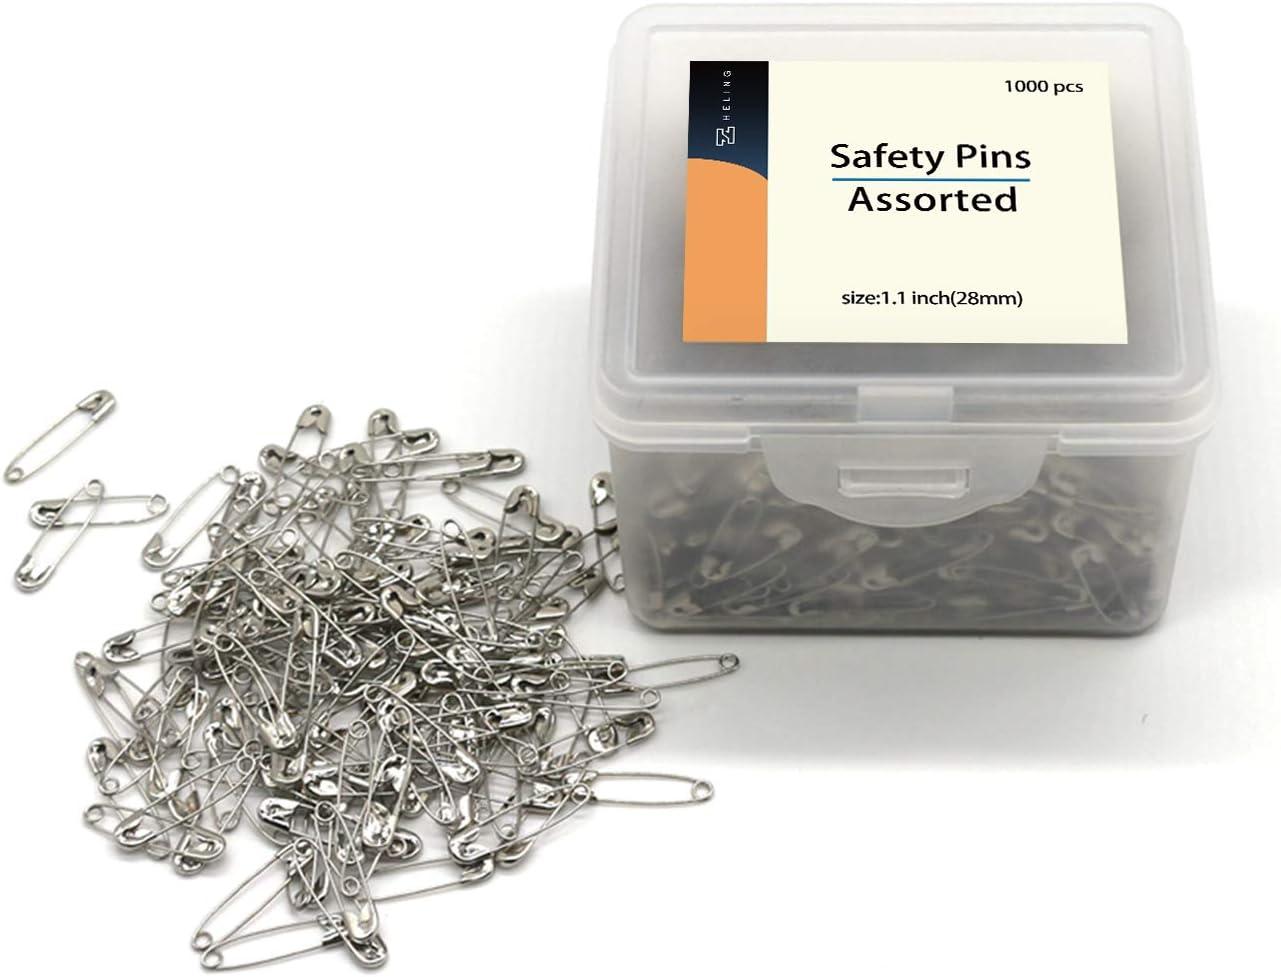  1000Pcs Safety Pins Assorted, 1.5 Inch Rust-Resistant Steel  Wire Silver Sewing Safety Pins For Clothes, Large Safety Pins 1.5 Inch Bulk  For Clothes Crafts Use